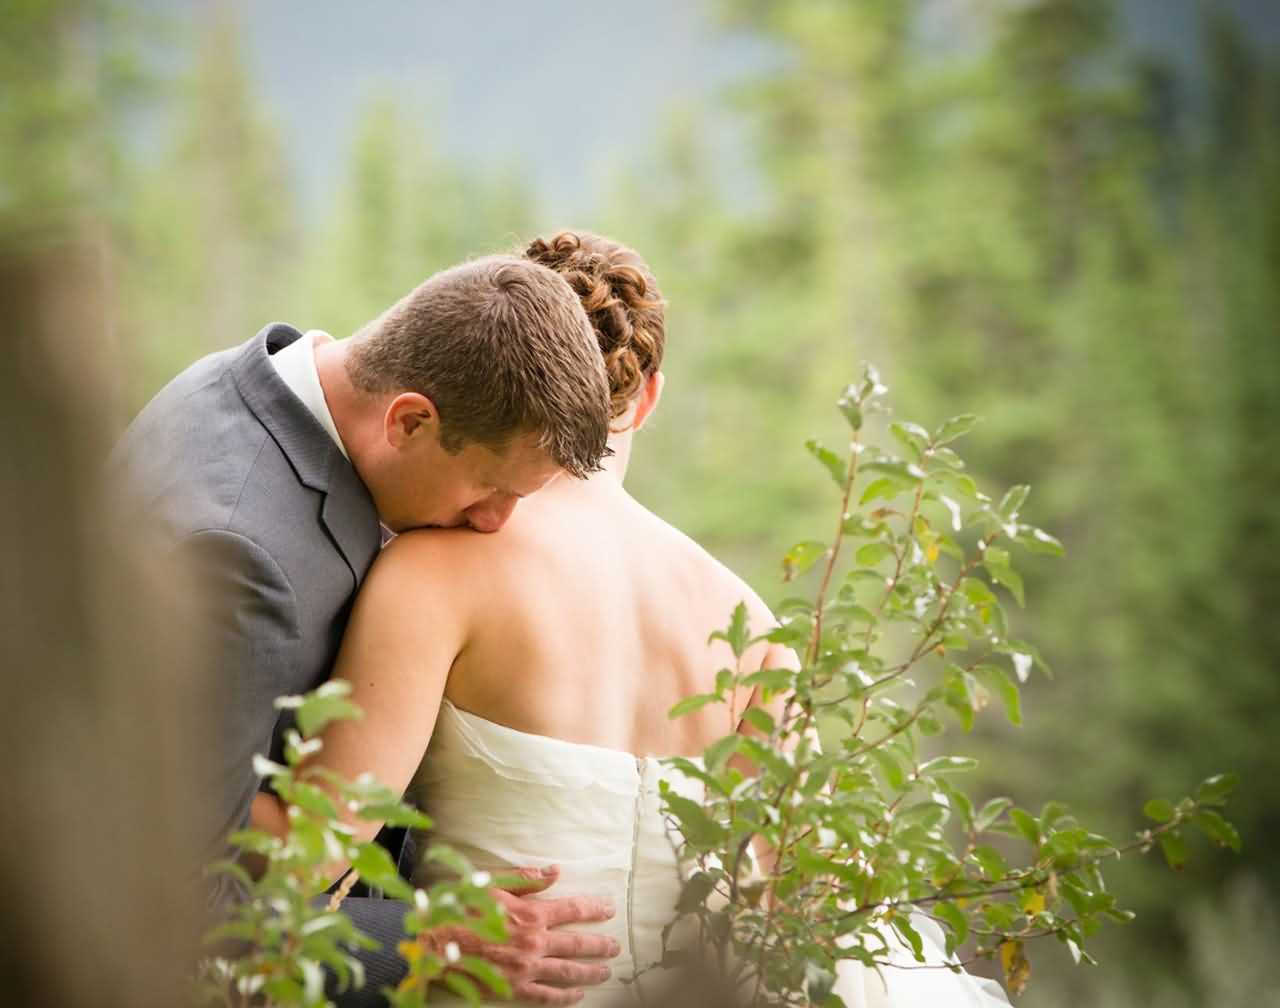 wedding wishes wallpaper,people in nature,photograph,bride,wedding dress,romance